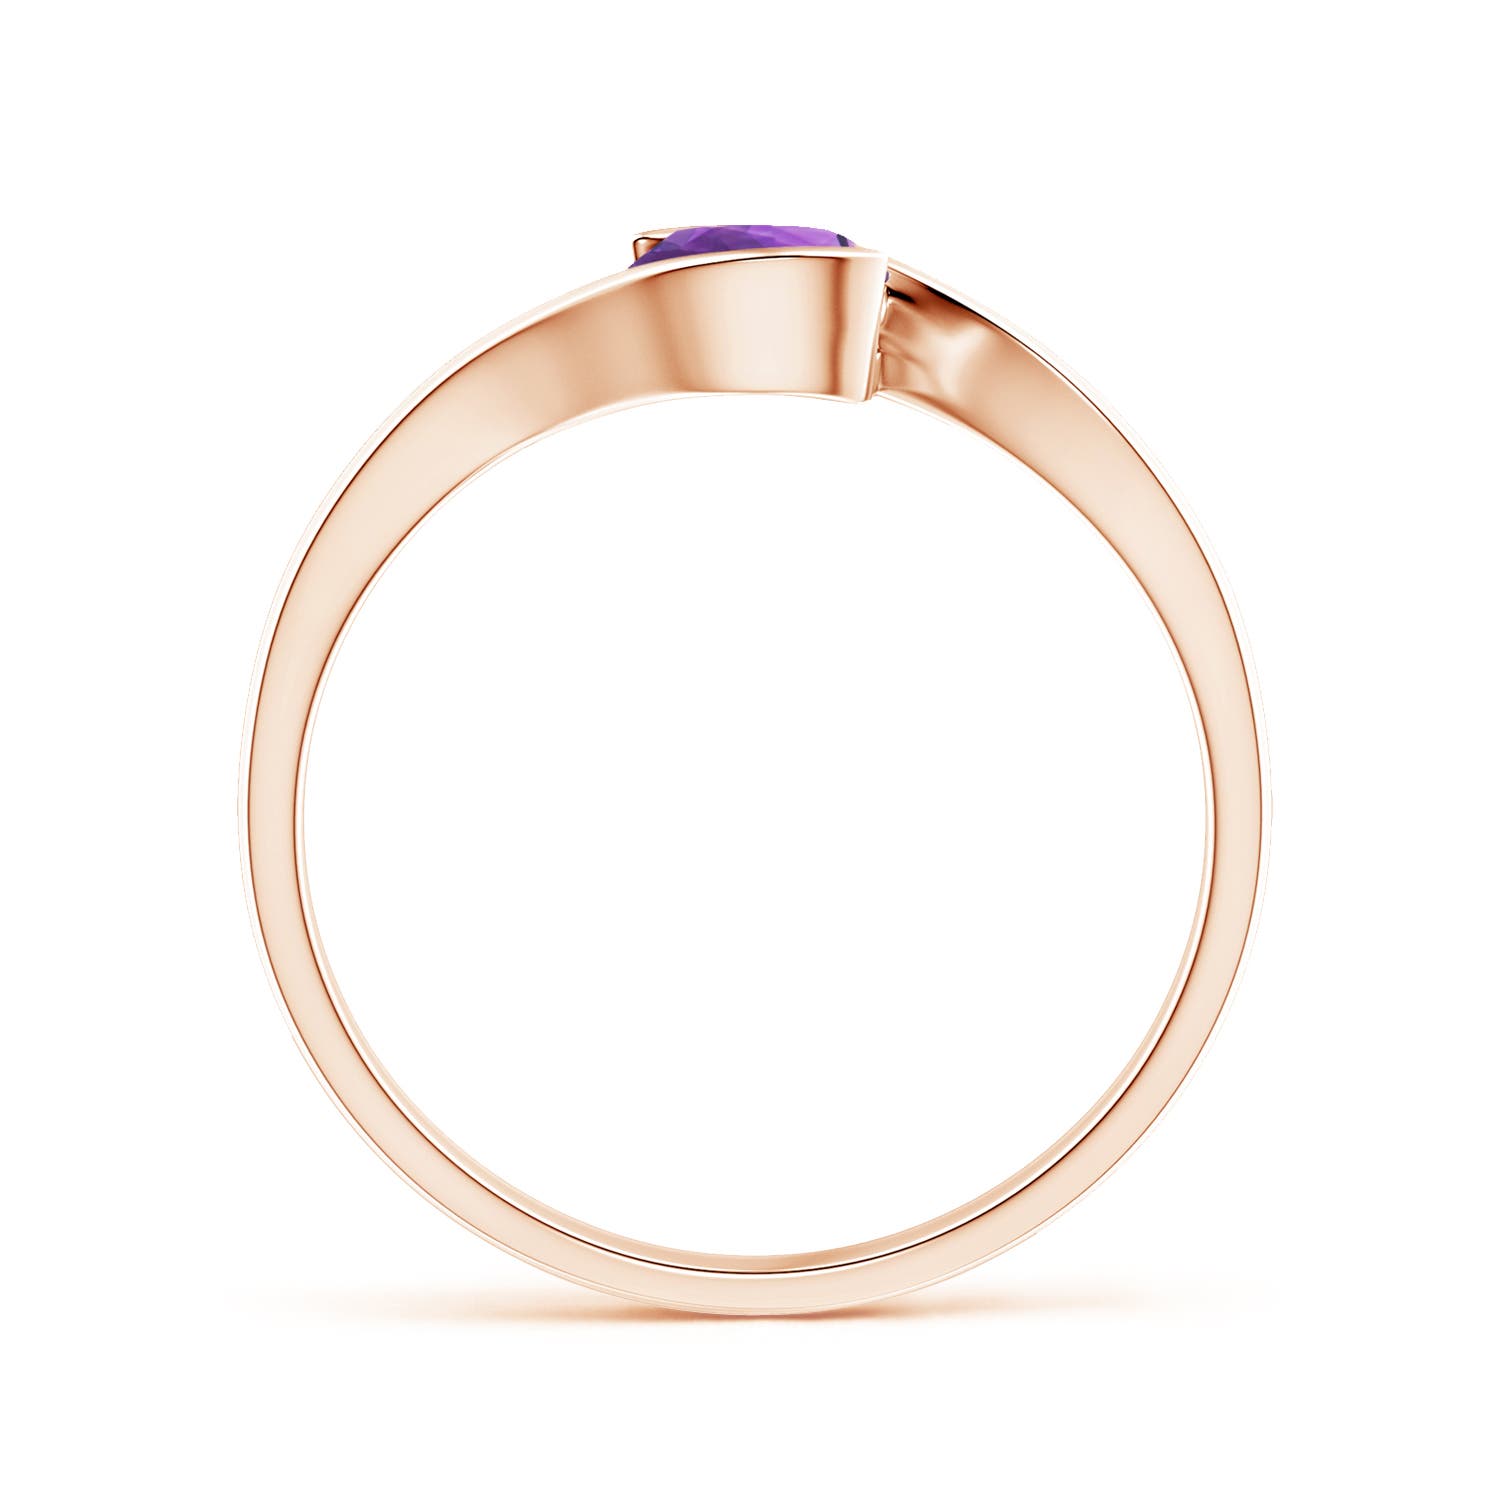 AAA - Amethyst / 0.45 CT / 14 KT Rose Gold